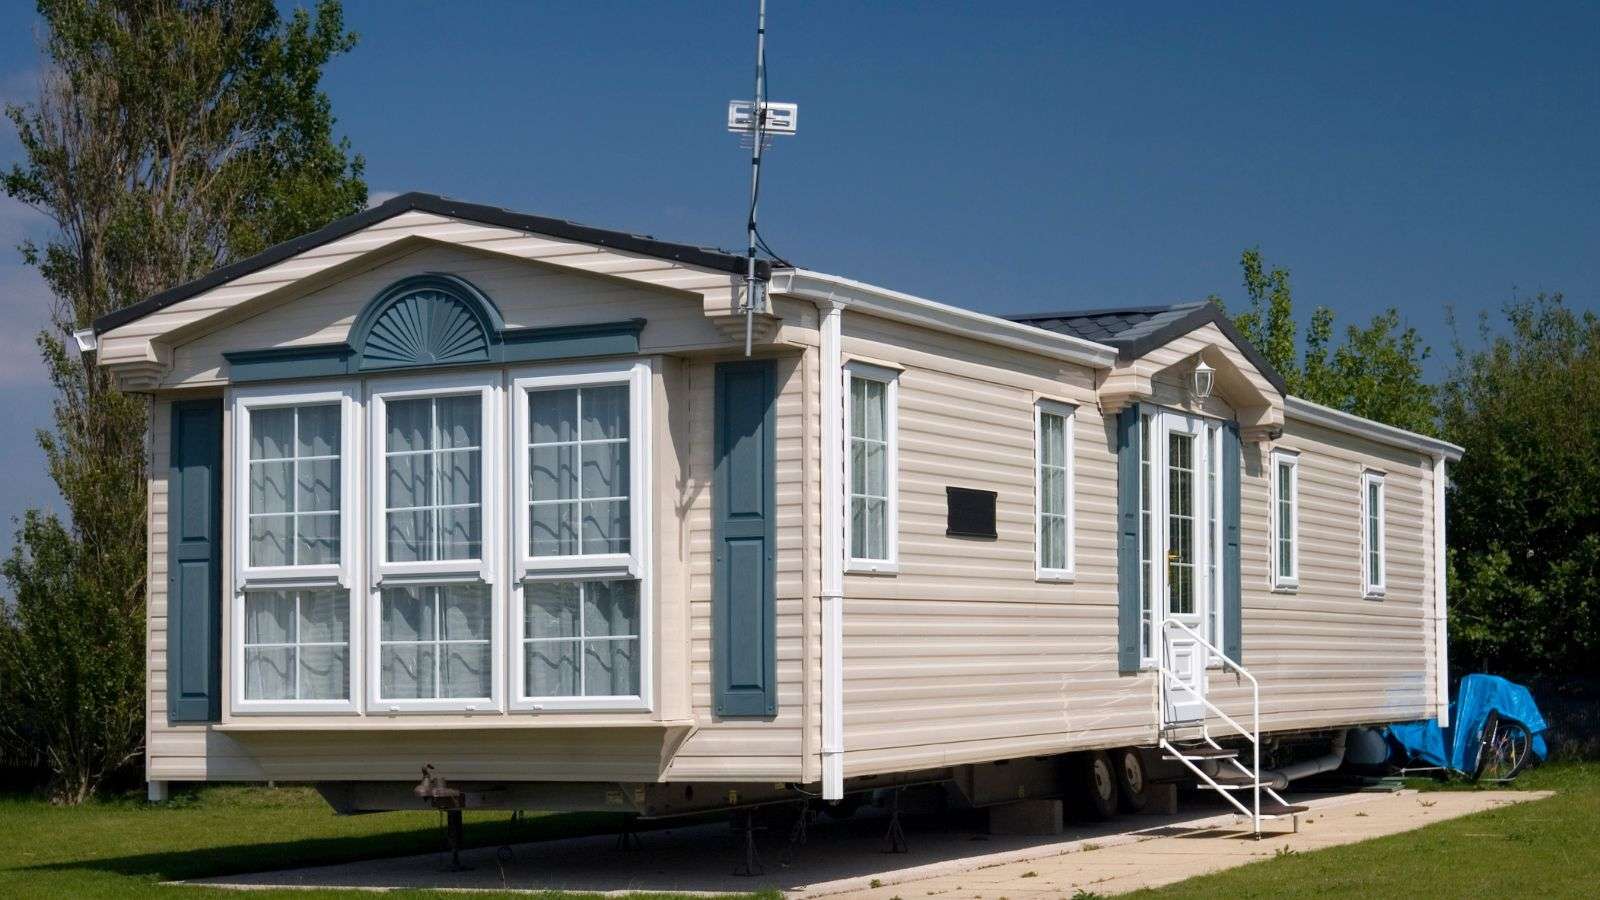 inspector for mobile home - bighomeprojects.com